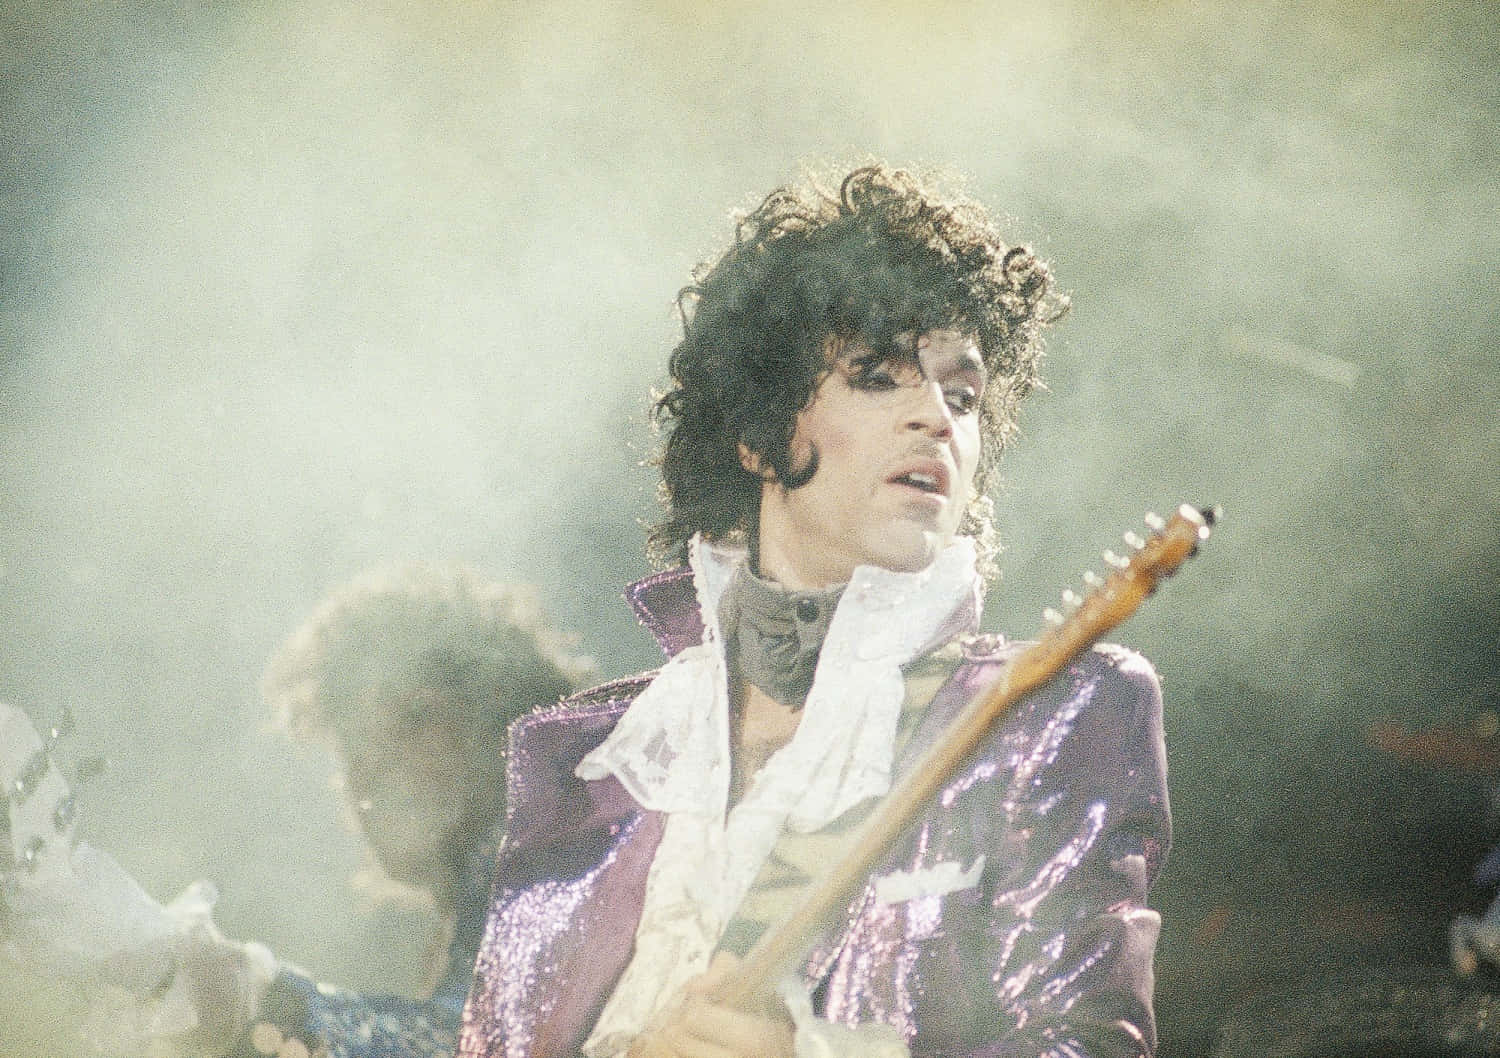 Prince stands onstage in all purple.